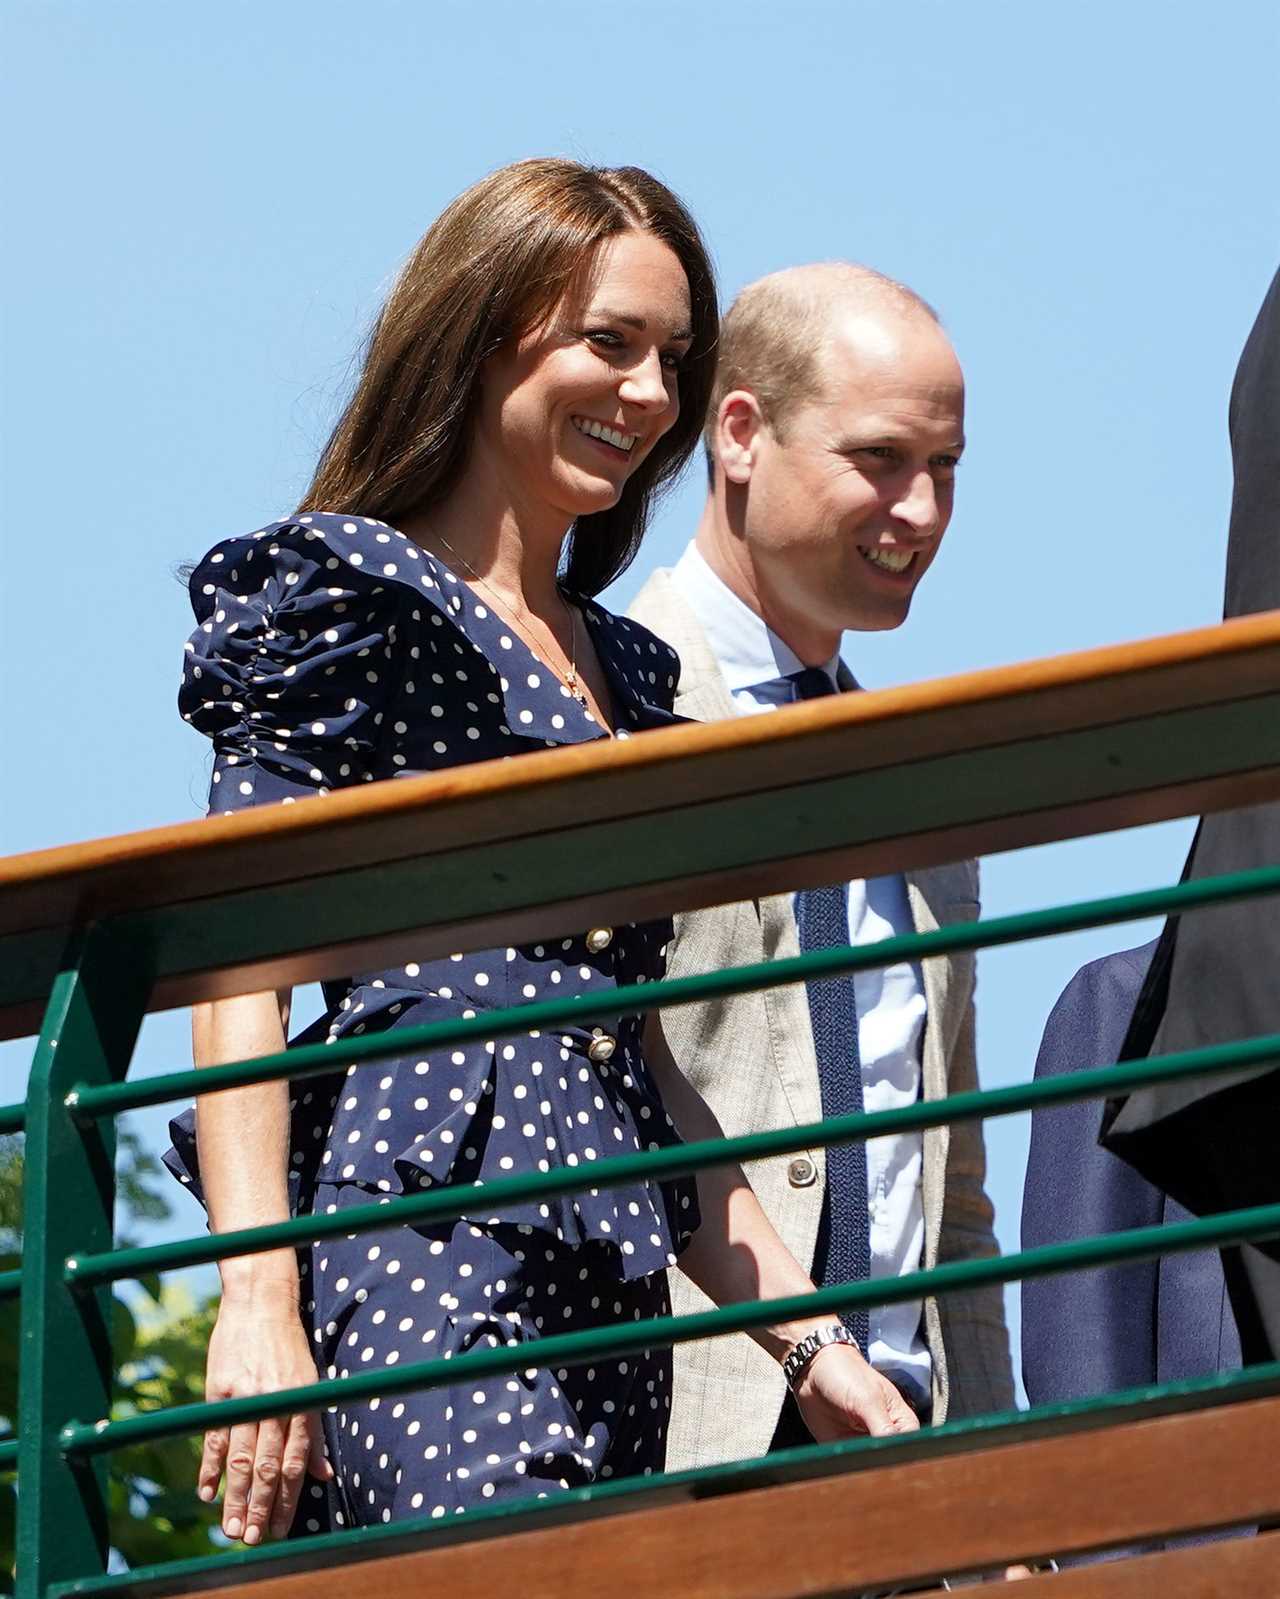 Prince George comes with Kate Middleton and William to watch Nick Kyrgios and Novak Djokovic in Wimbledon final